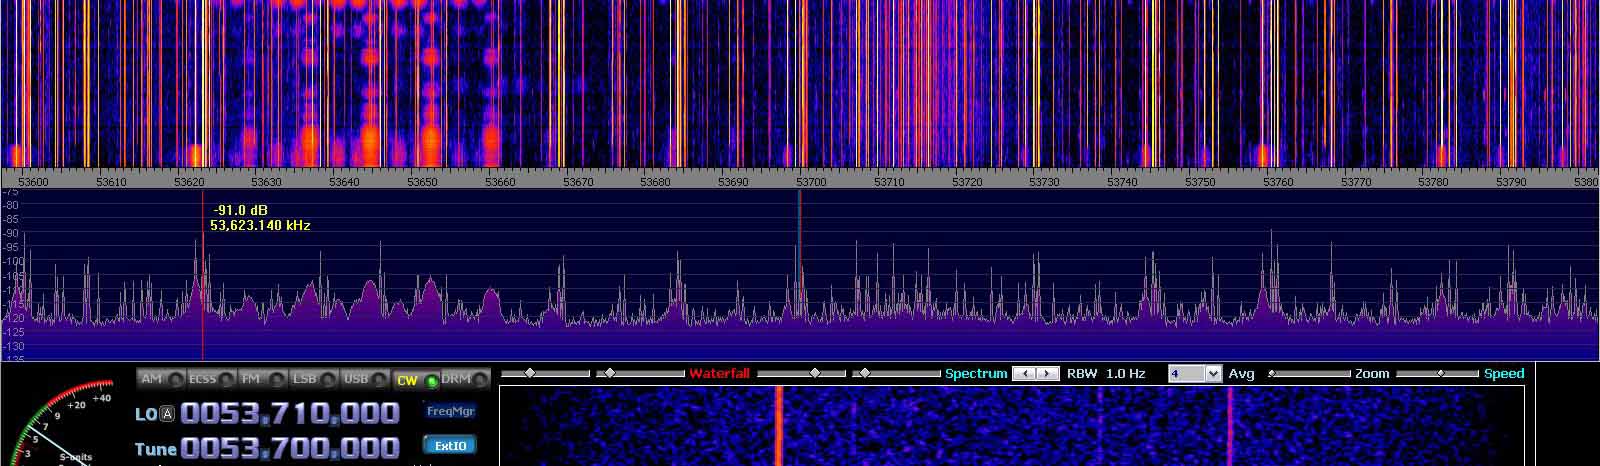 2014-07-04 53.700 MHz +- 100 kHz - Strong Es - 4-el dipole array with ends to St P - (c) OH7HJ.JPG